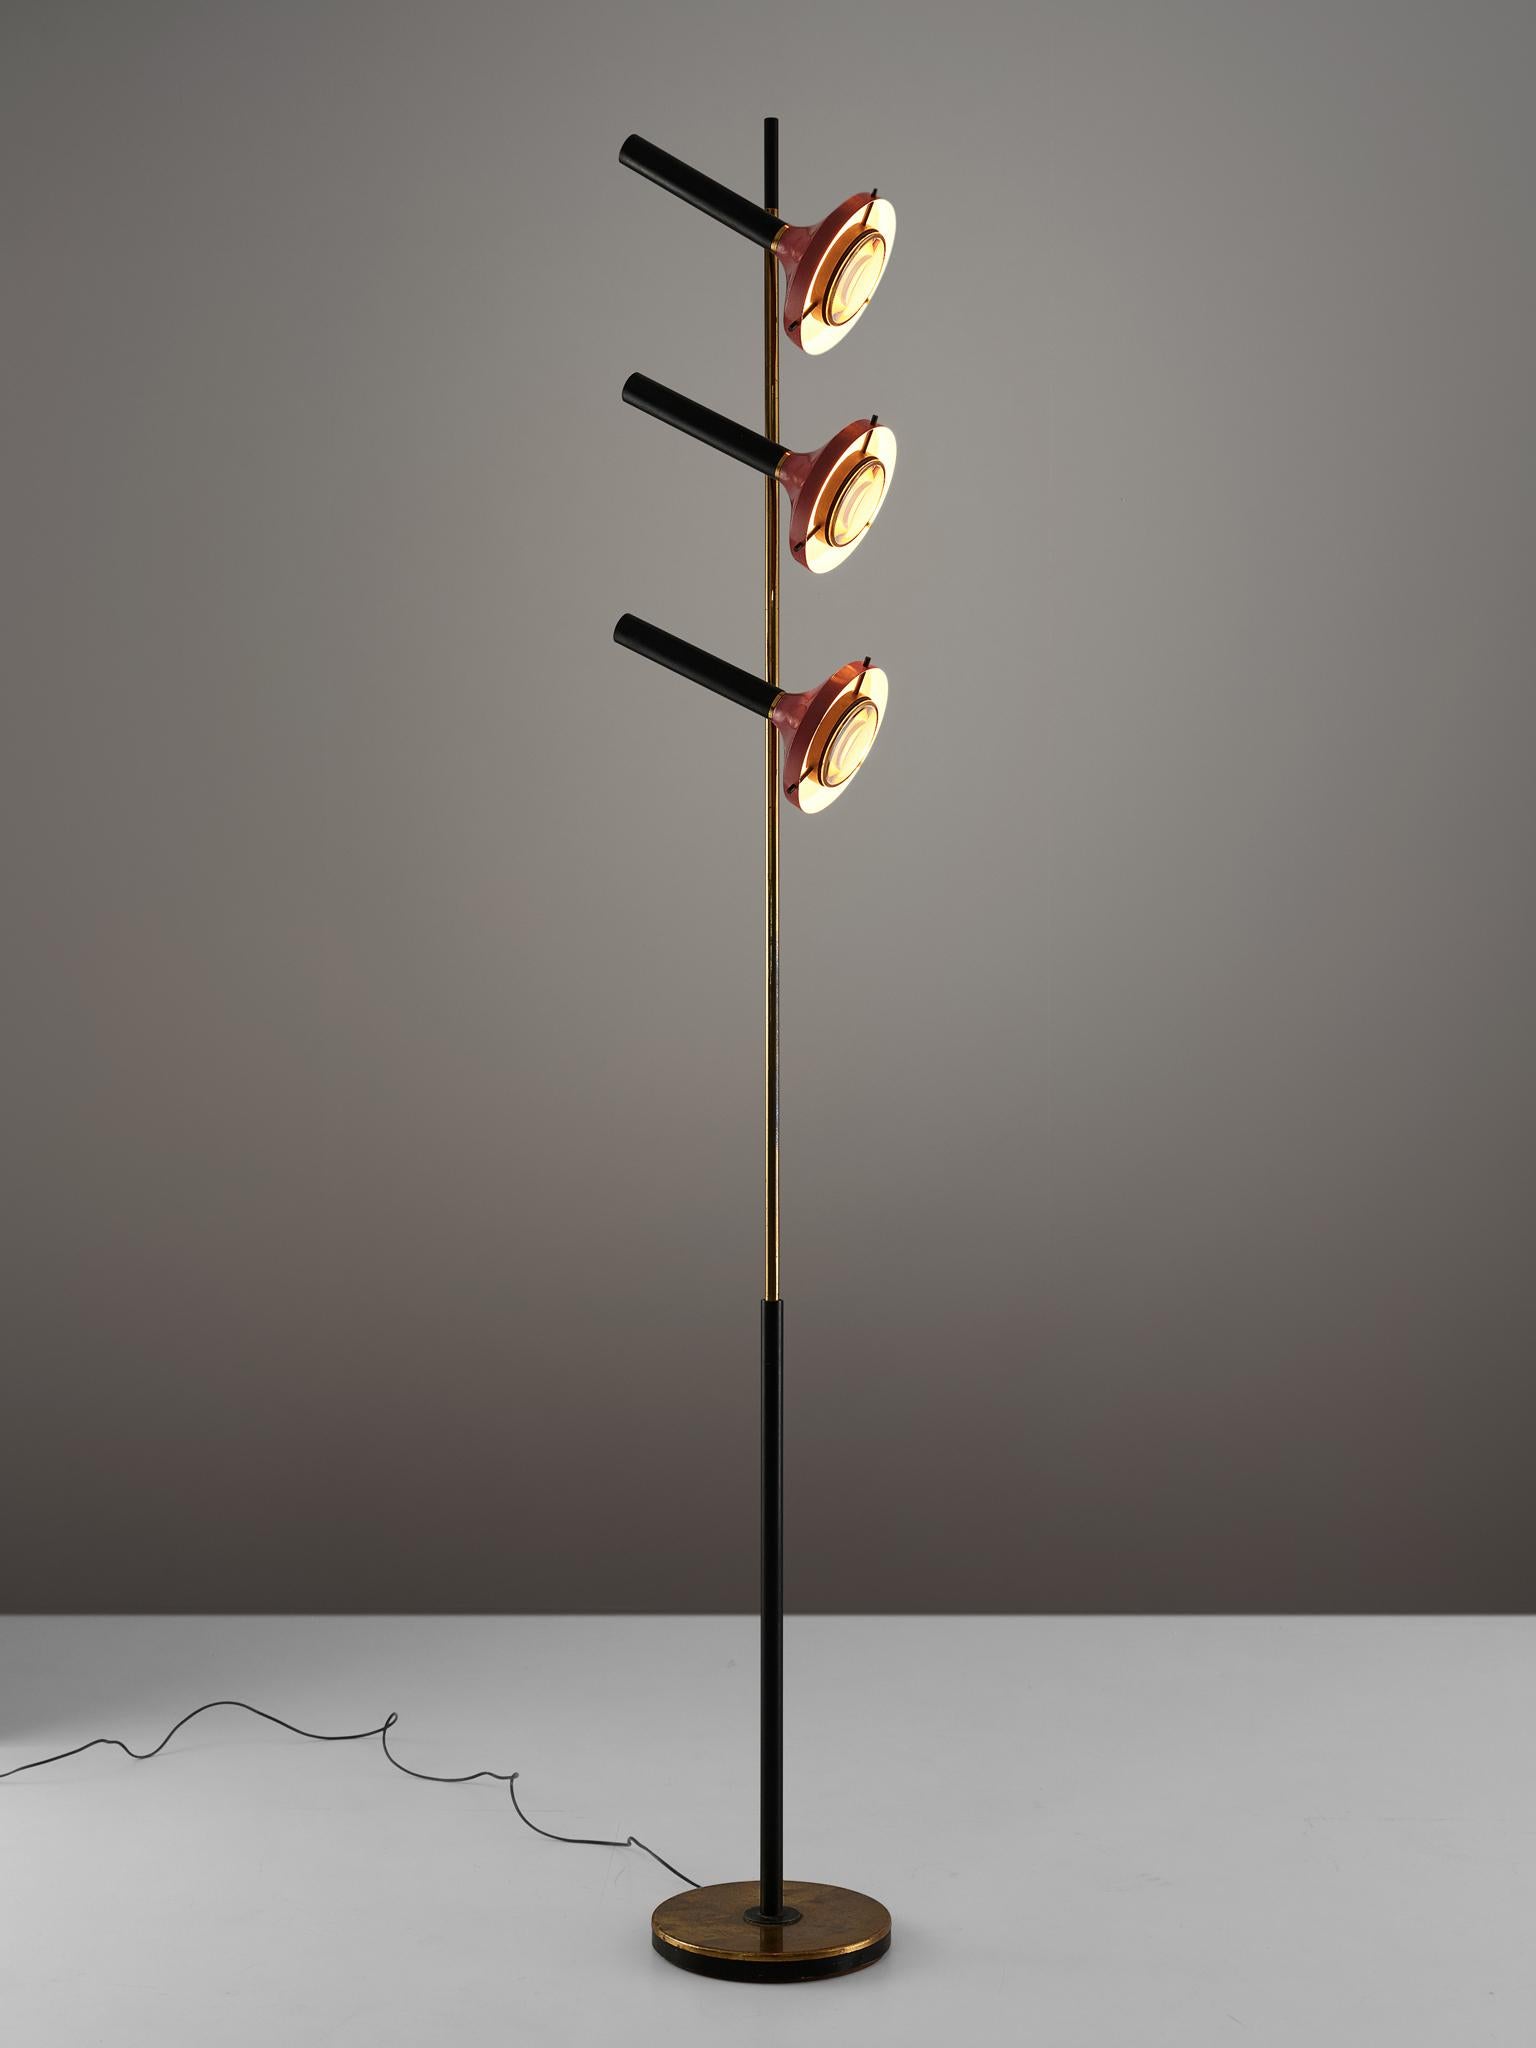 Oscar Torlasco for Lumi Milano, floor lamp, metal, brass and glass, Italy, 1950s.

Refined floor light with three shades by Italian designer Oscar Torlasco. The lamp consist of a round base from which the high rod with three adjustable lights